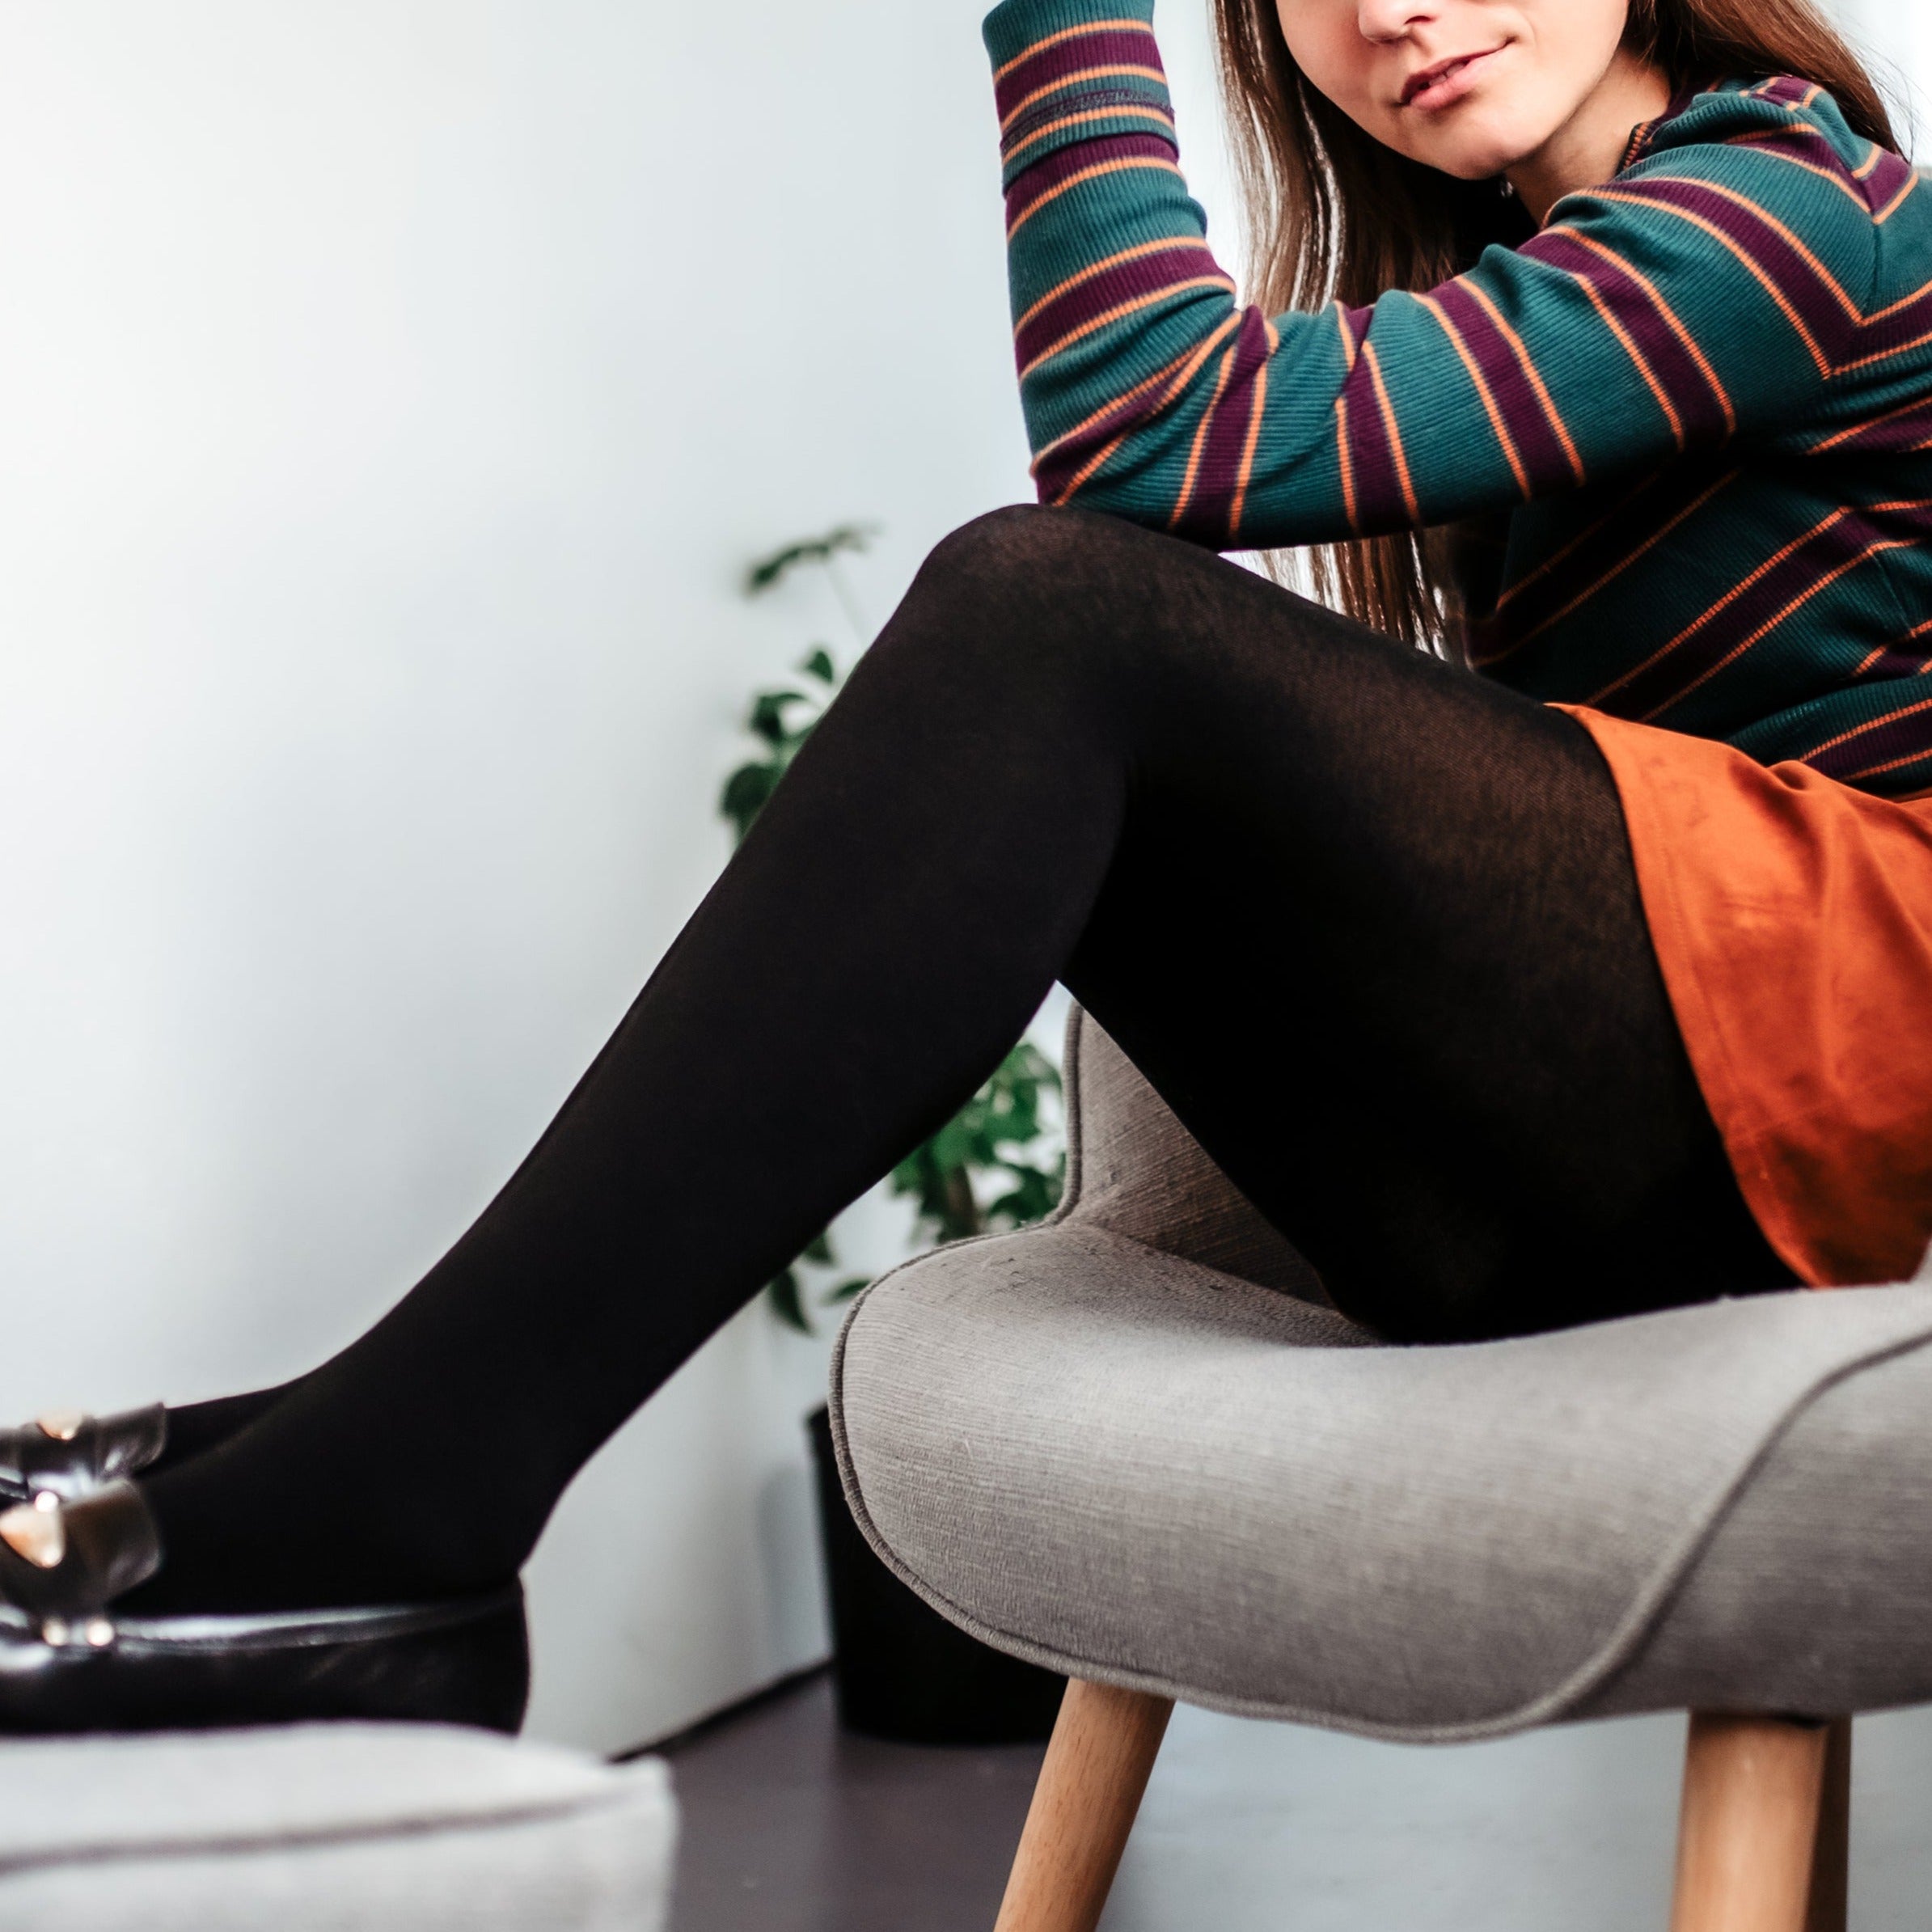 Donna black ethically made viscose and merino wool tights by Miss Lala